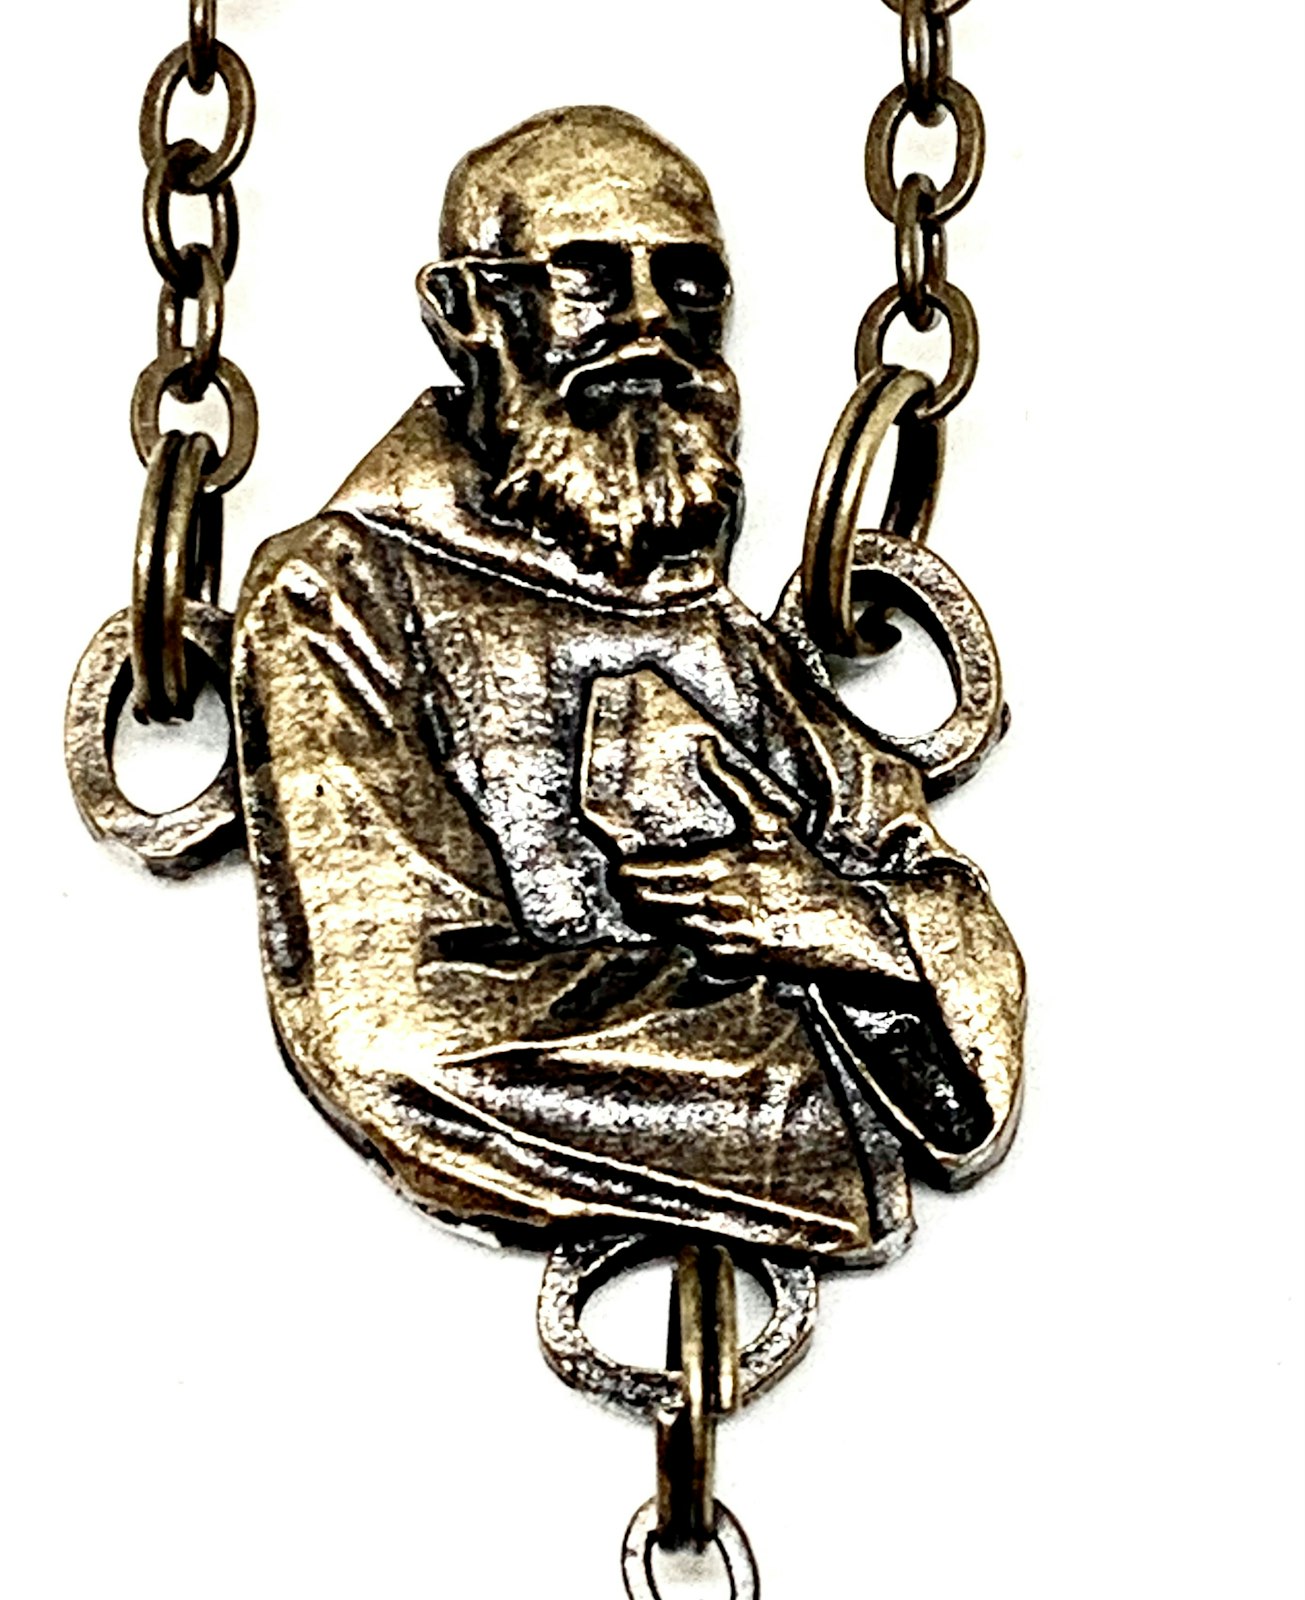 A custom rosary designed by Ghirelli features the likeness of Blessed Solanus Casey.